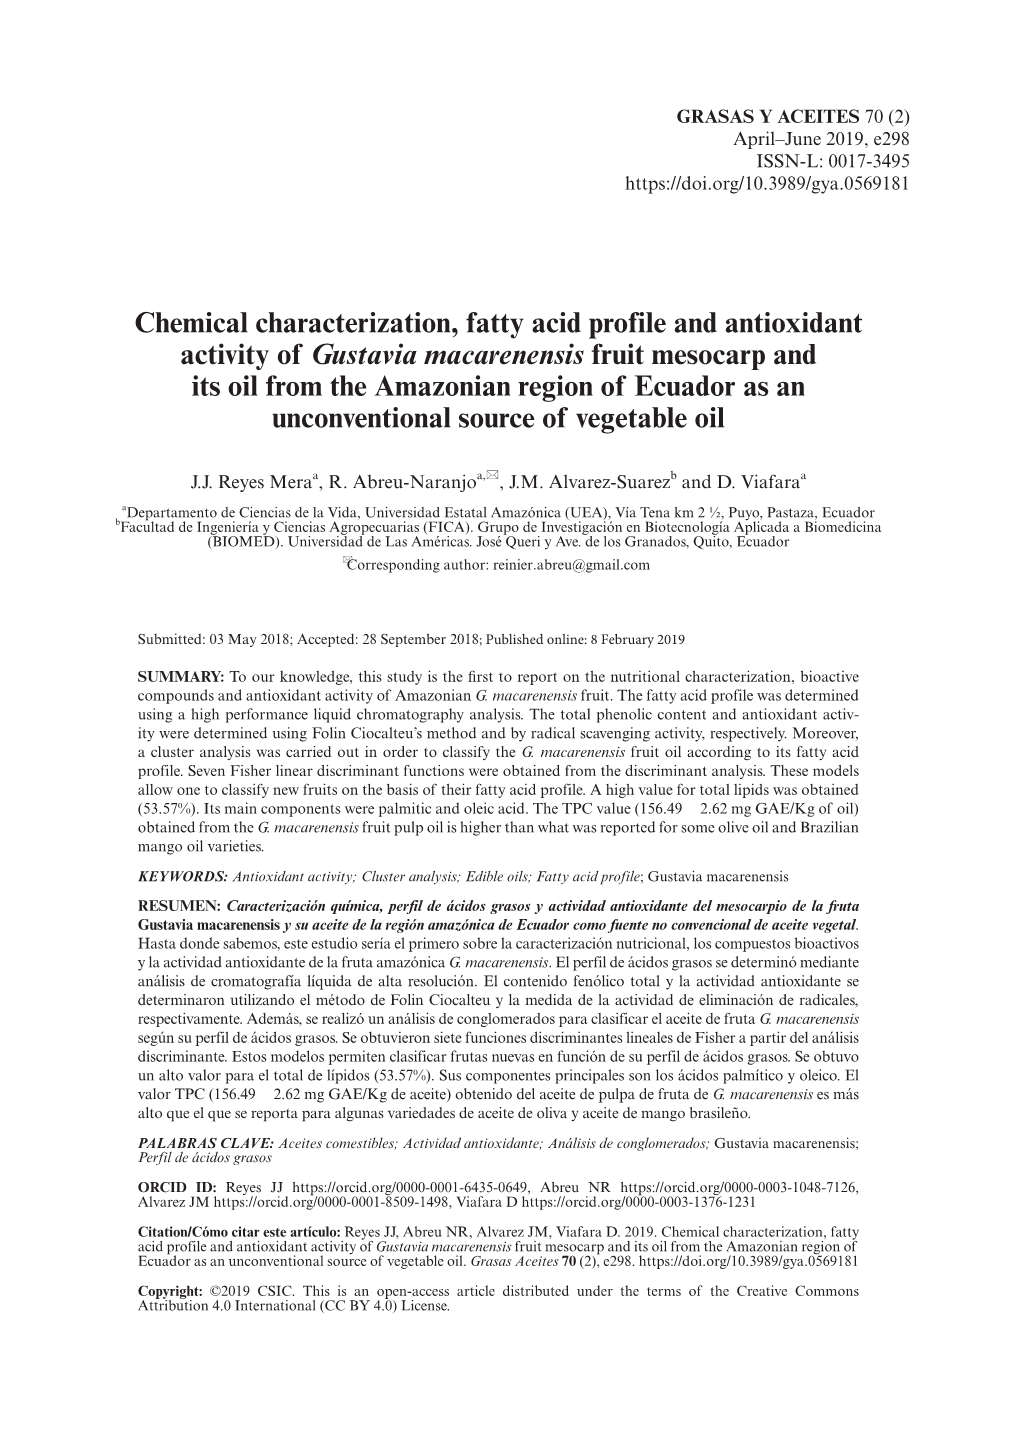 Chemical Characterization, Fatty Acid Profile and Antioxidant Activity Of